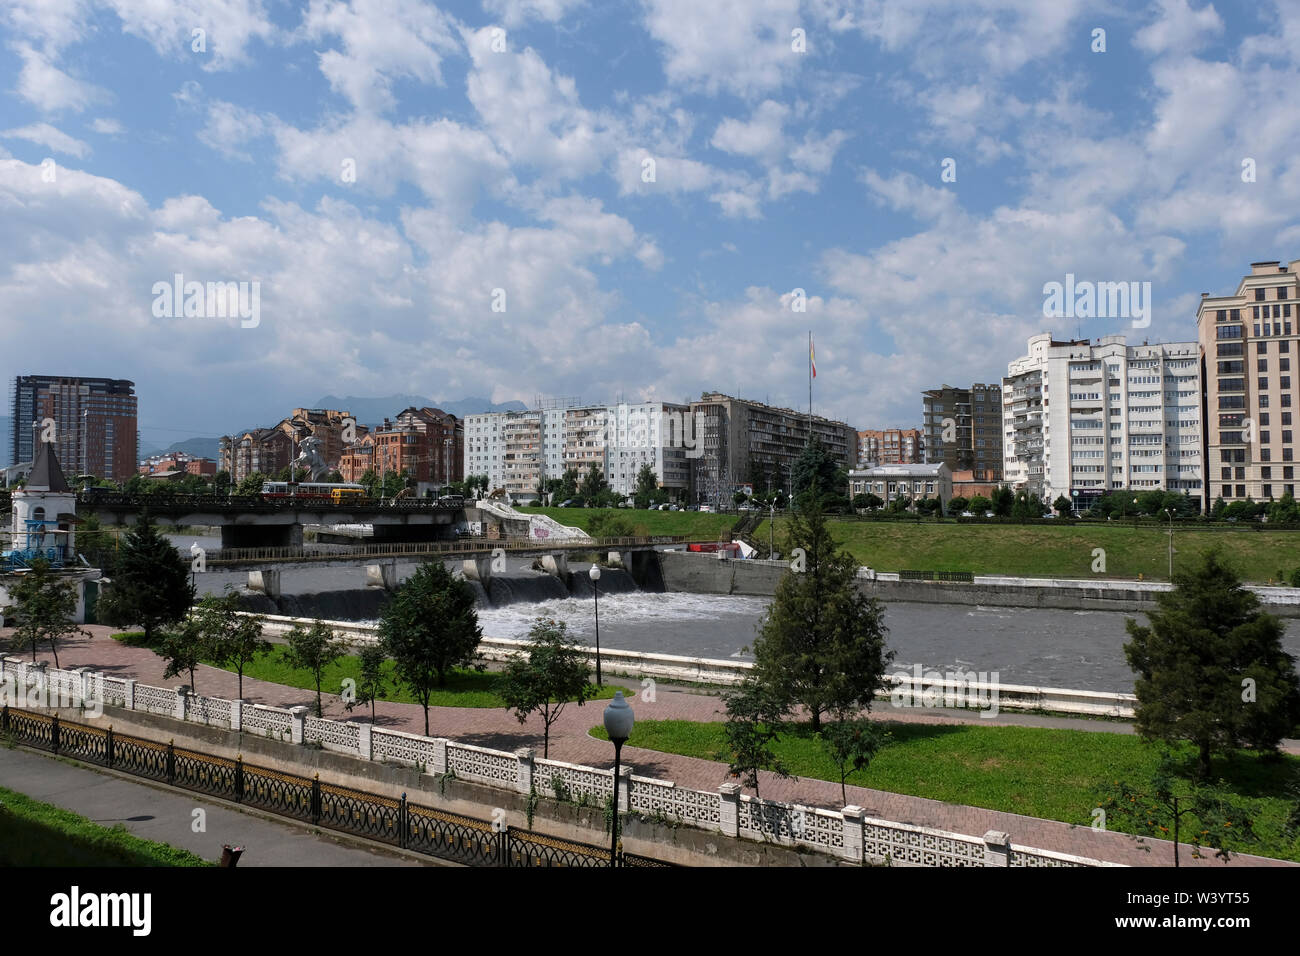 View of Terek river flowing through  Vladikavkaz the capital city of the Republic of North Ossetia-Alania in the North Caucasian Federal District of Russia. Stock Photo